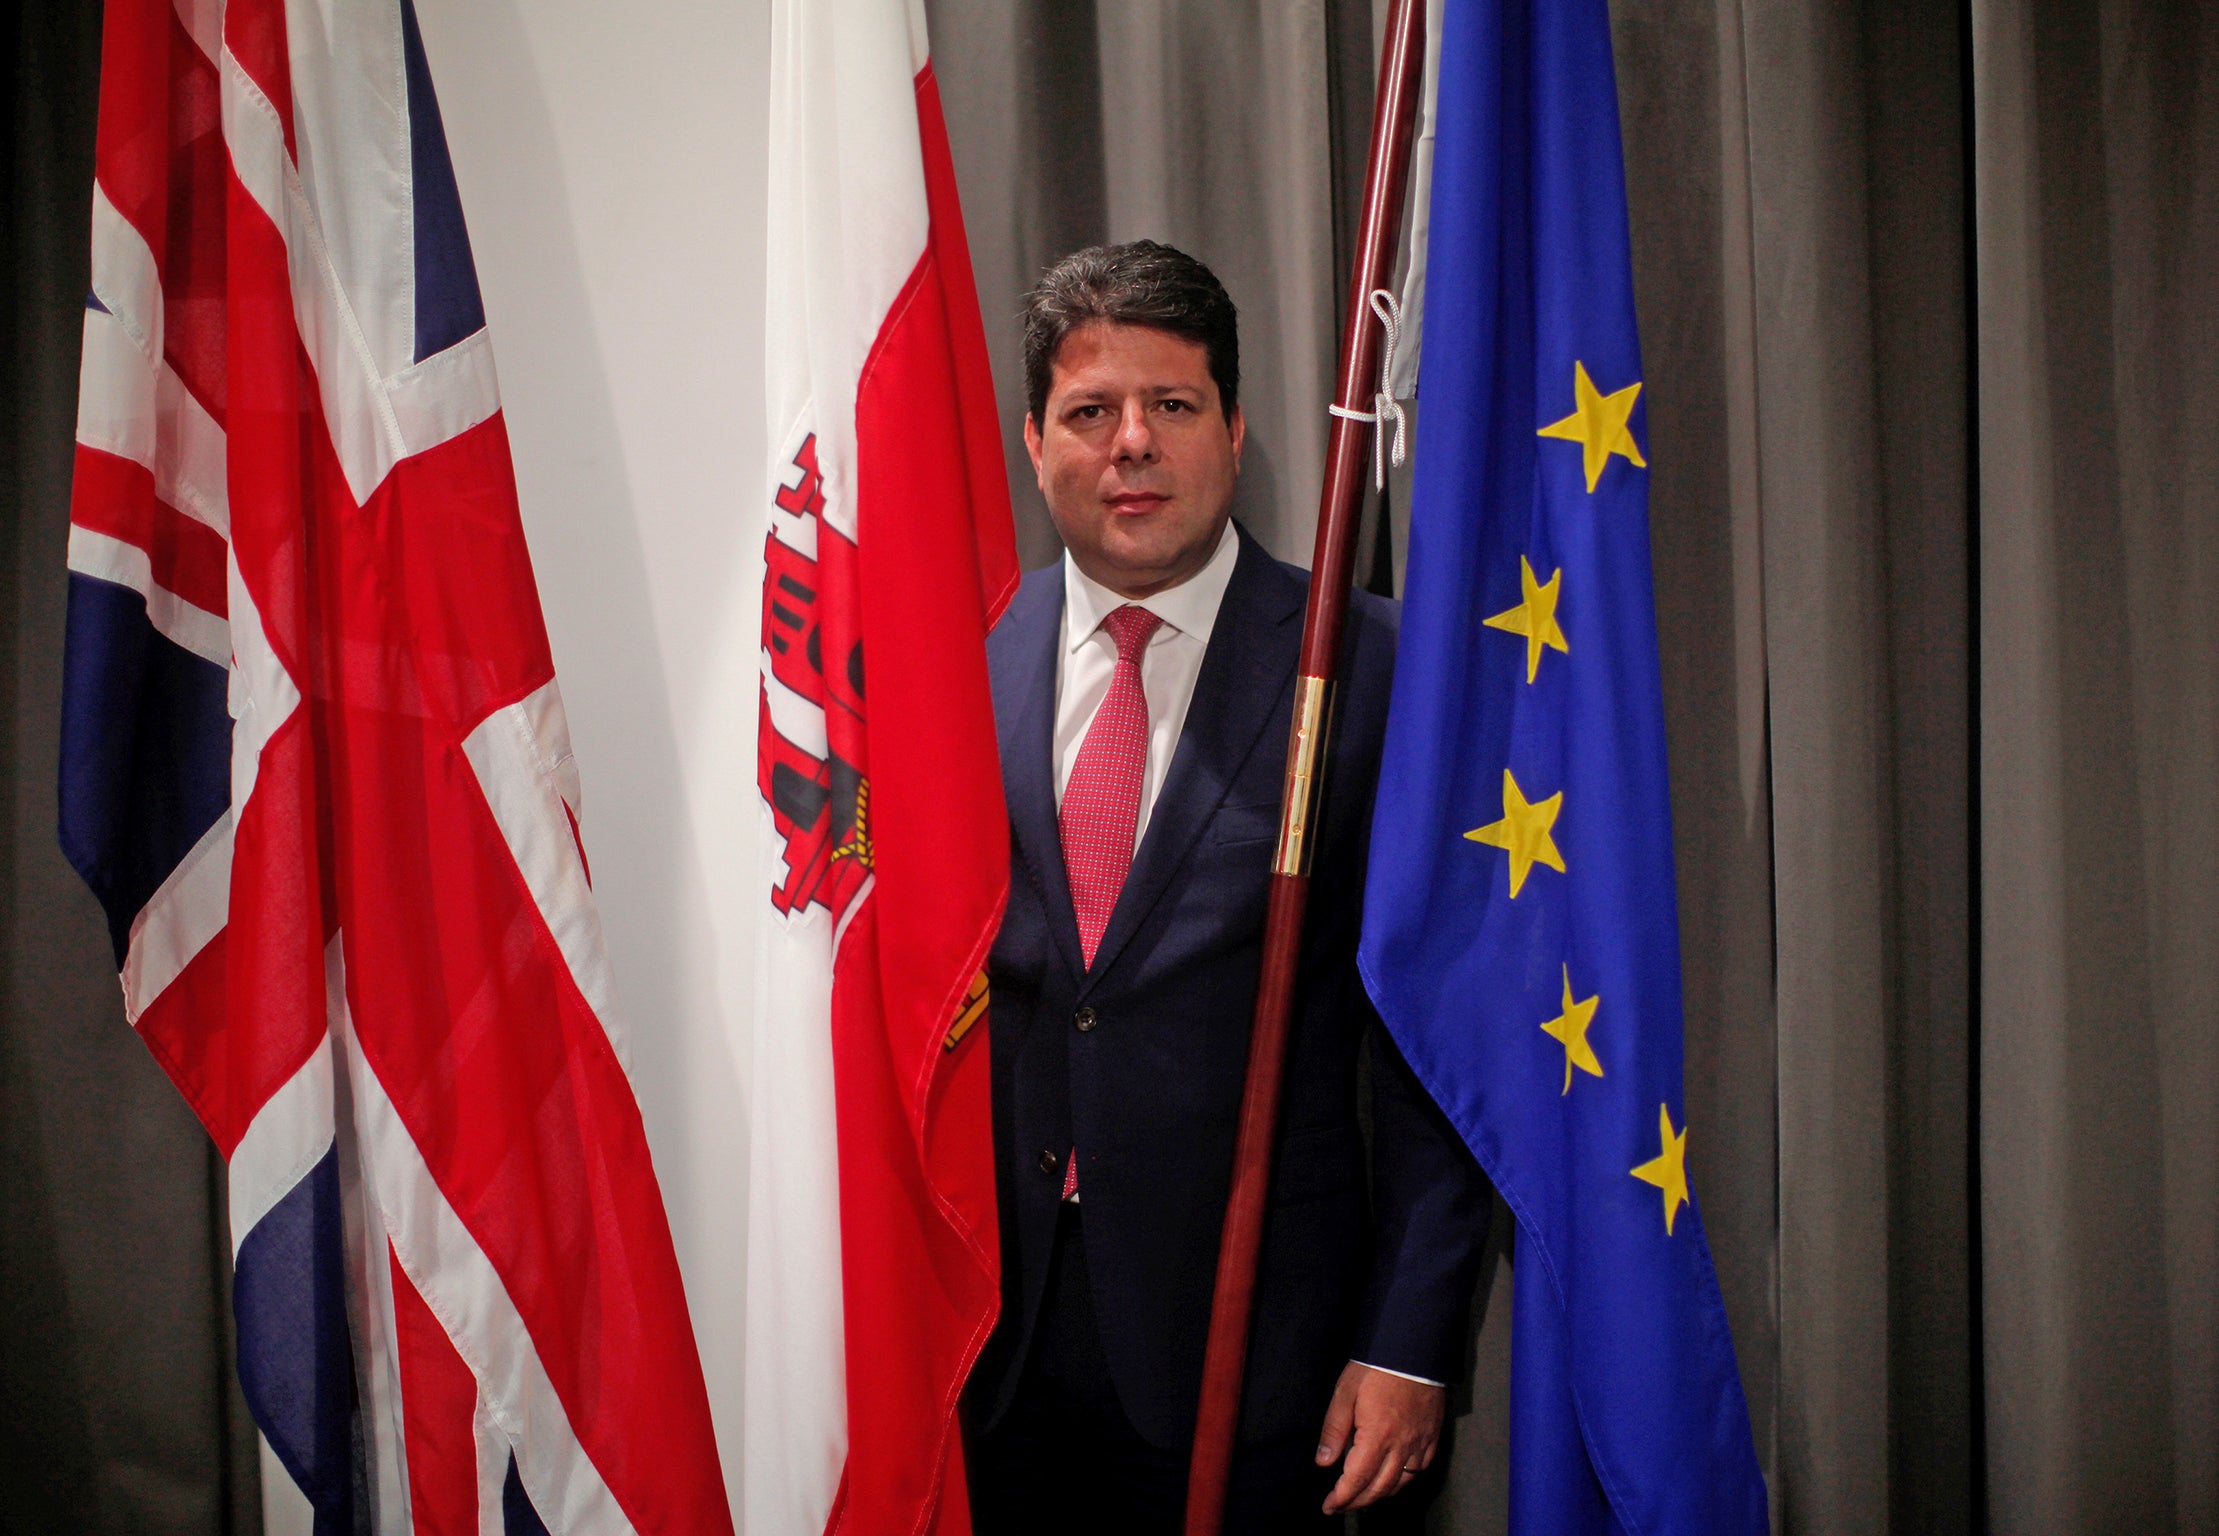 Fabian Picardo presides over the region that delivered the highest ‘Remain’ vote – 96 per cent – in the EU referendum